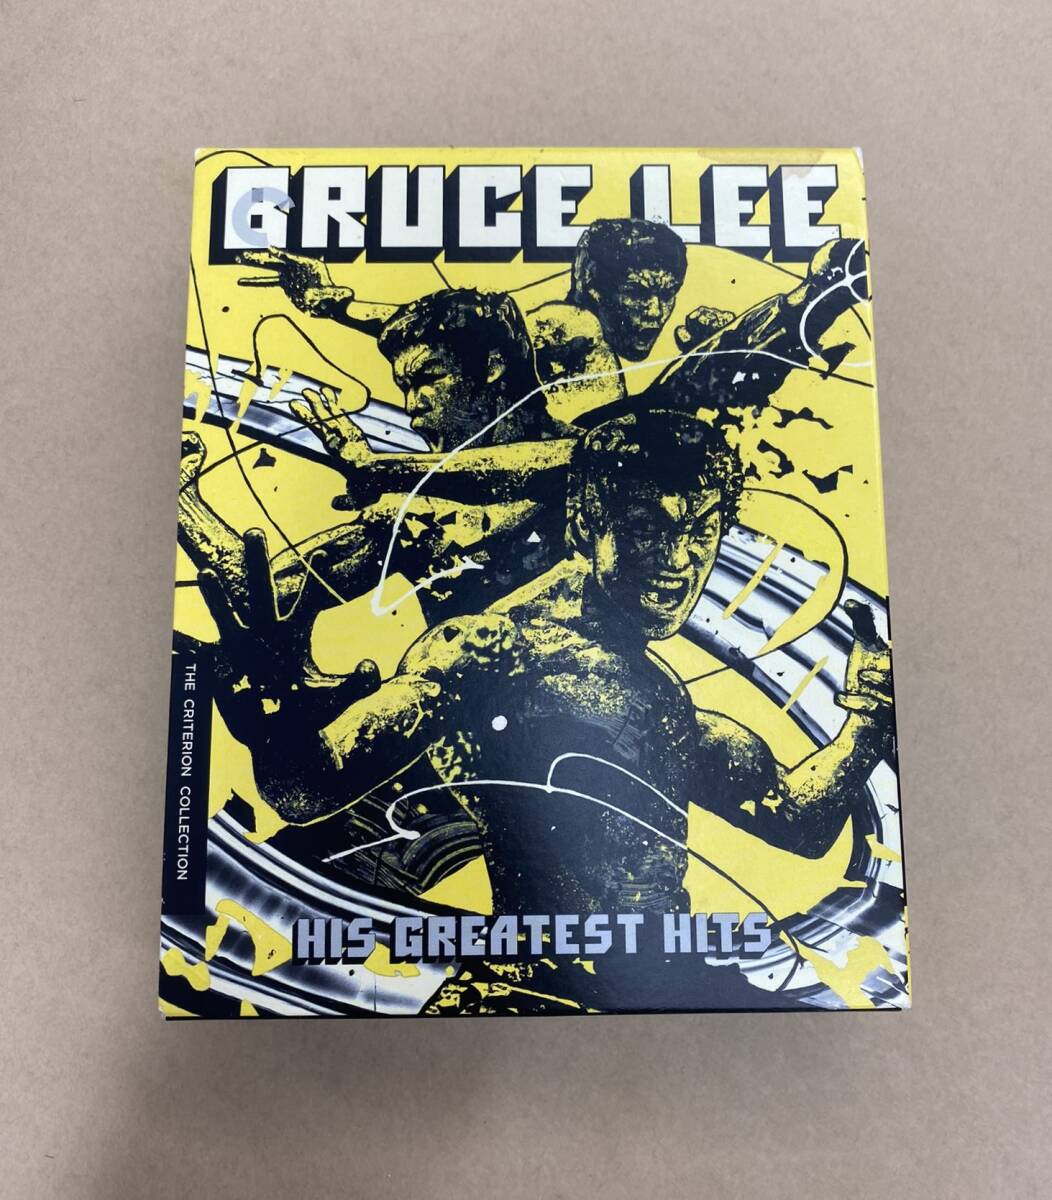 ★R207 / 中古品 Bruce Lee / ブルース リー: His Greatest Hits (Criterion Collection) Blu-ray ★の画像1